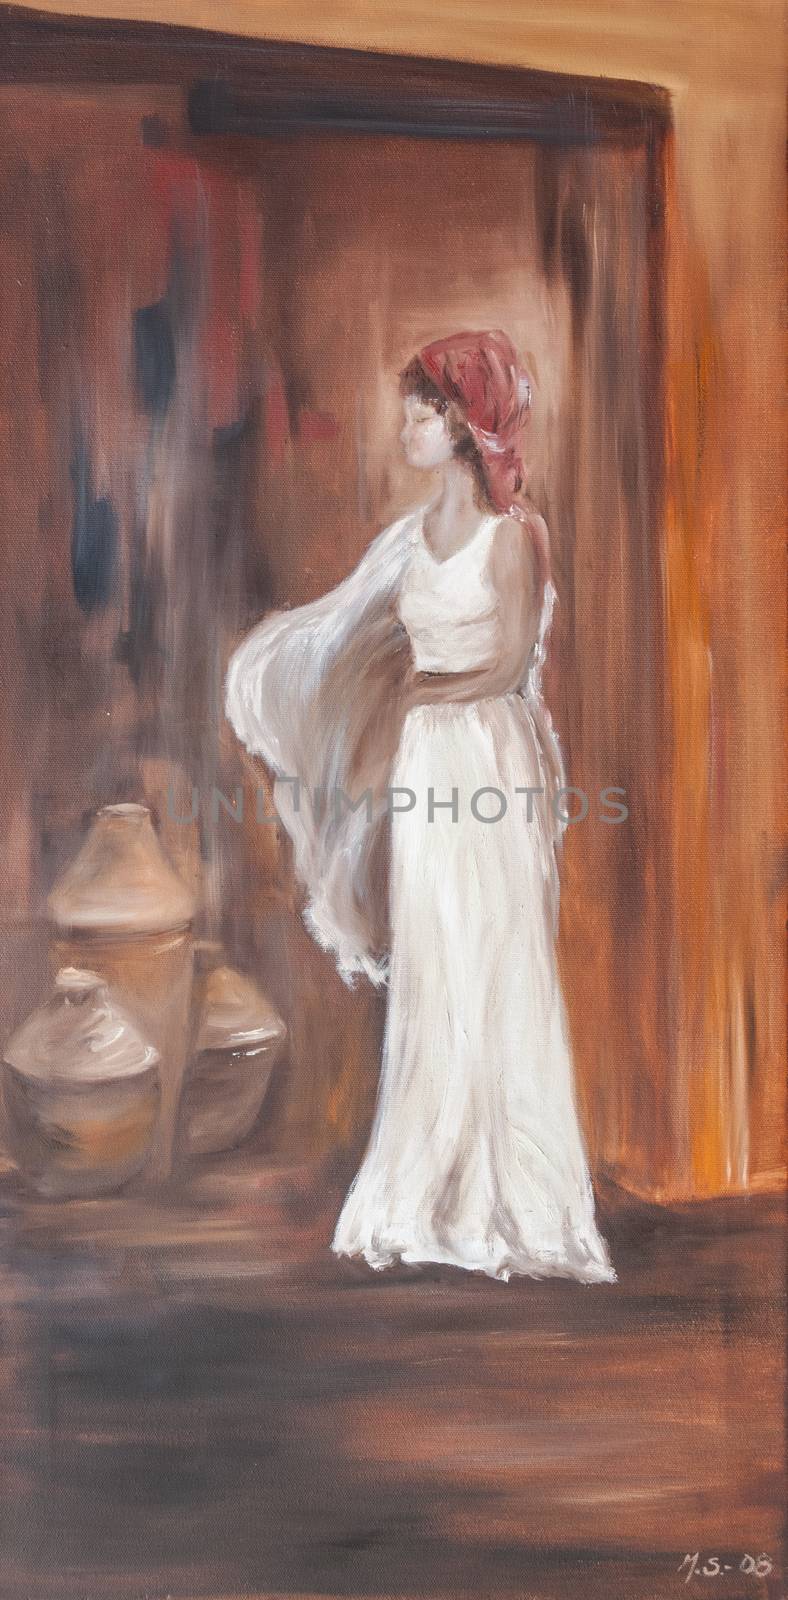 Lady in white dress is posing like a model. Figurative oil painting art on canvas by QQJXw824zEfXDVTP9u